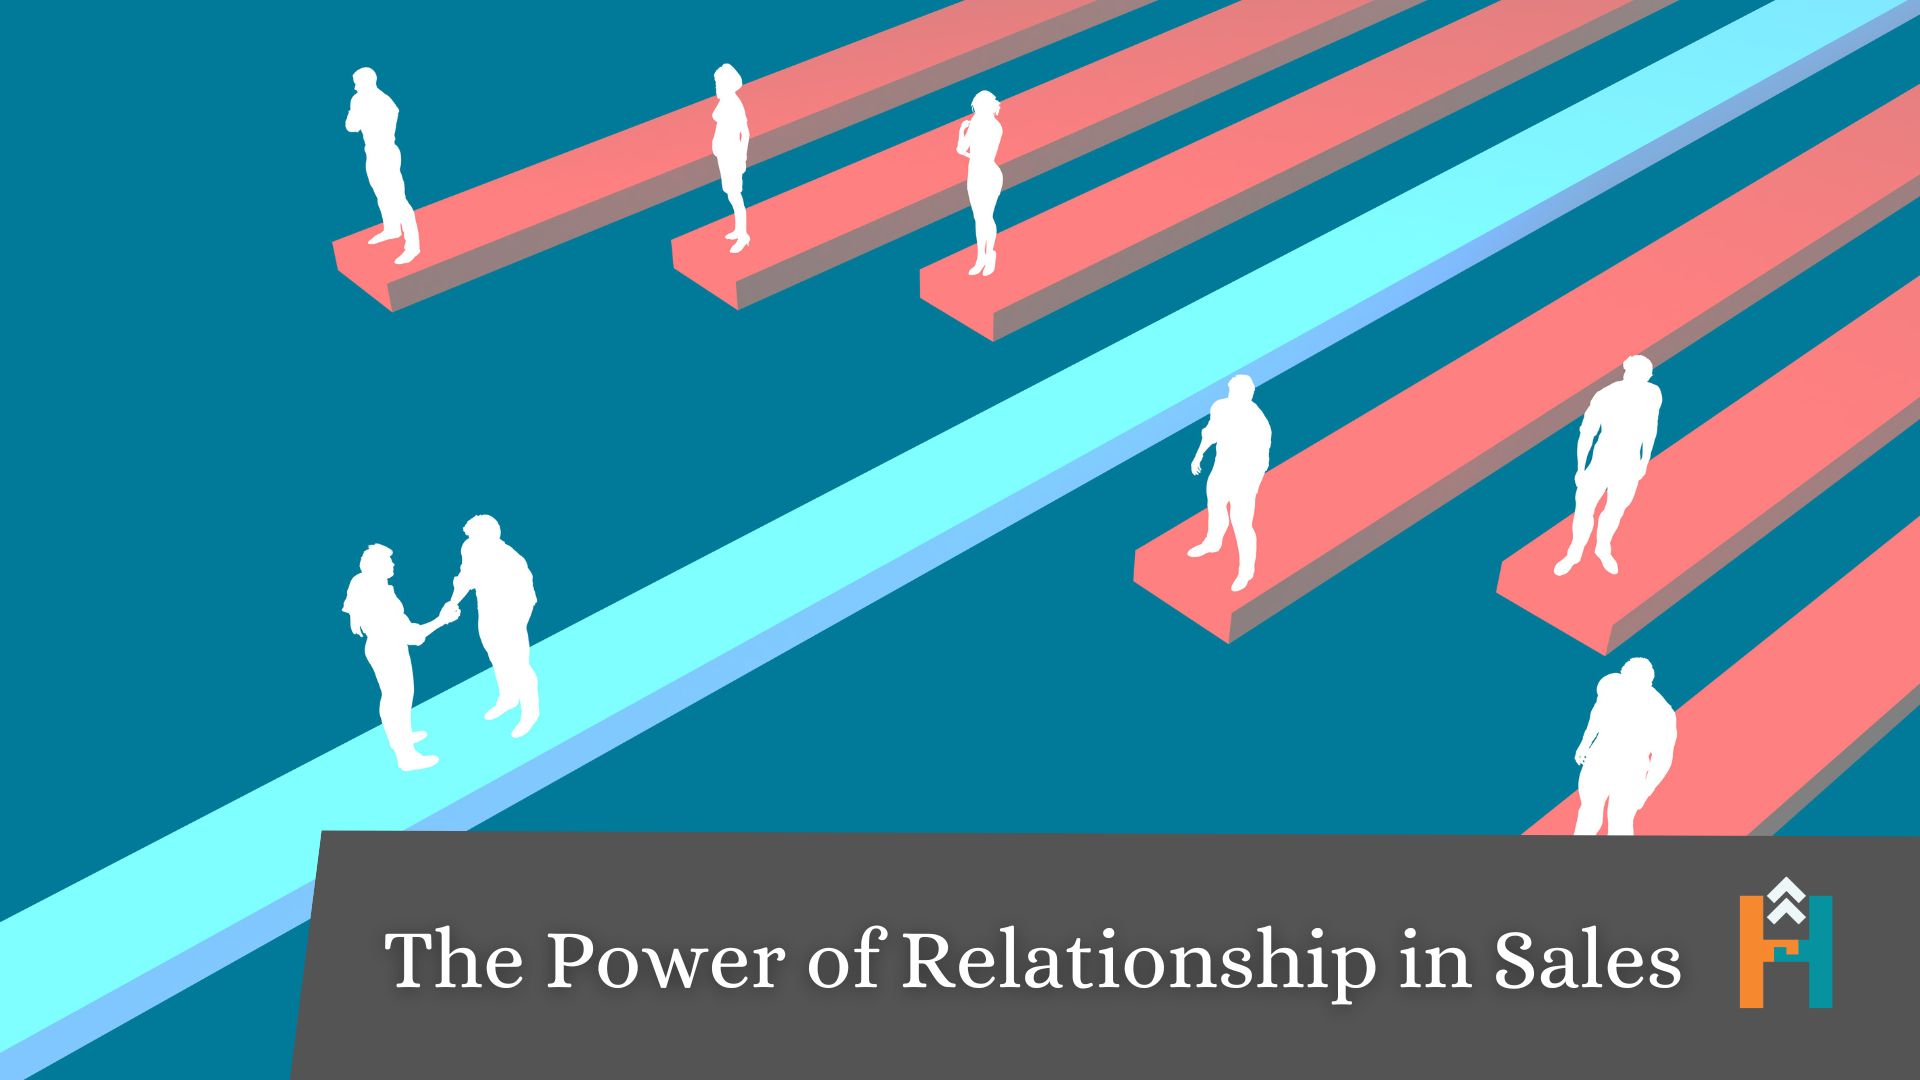 The Power of Relationship in Sales